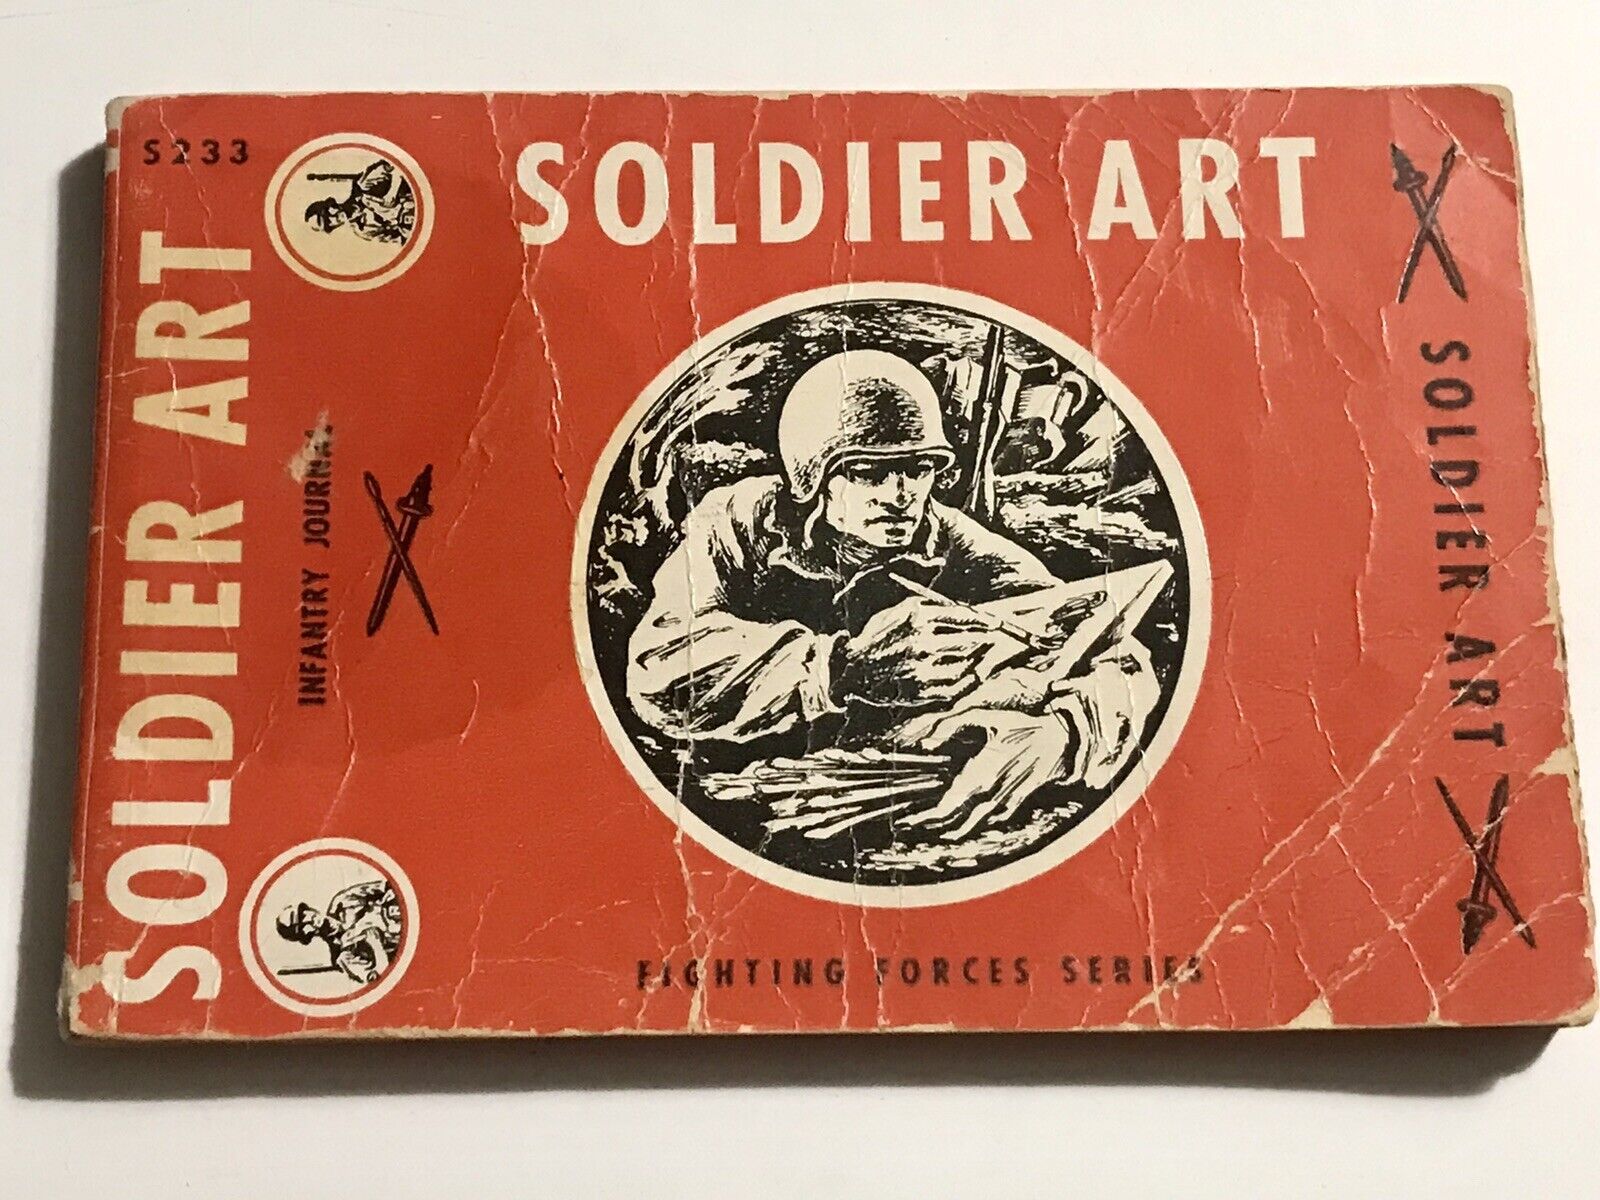 Soldier Art Armed Services Edition 1945 Books in Wartime WWII army Armed Forces